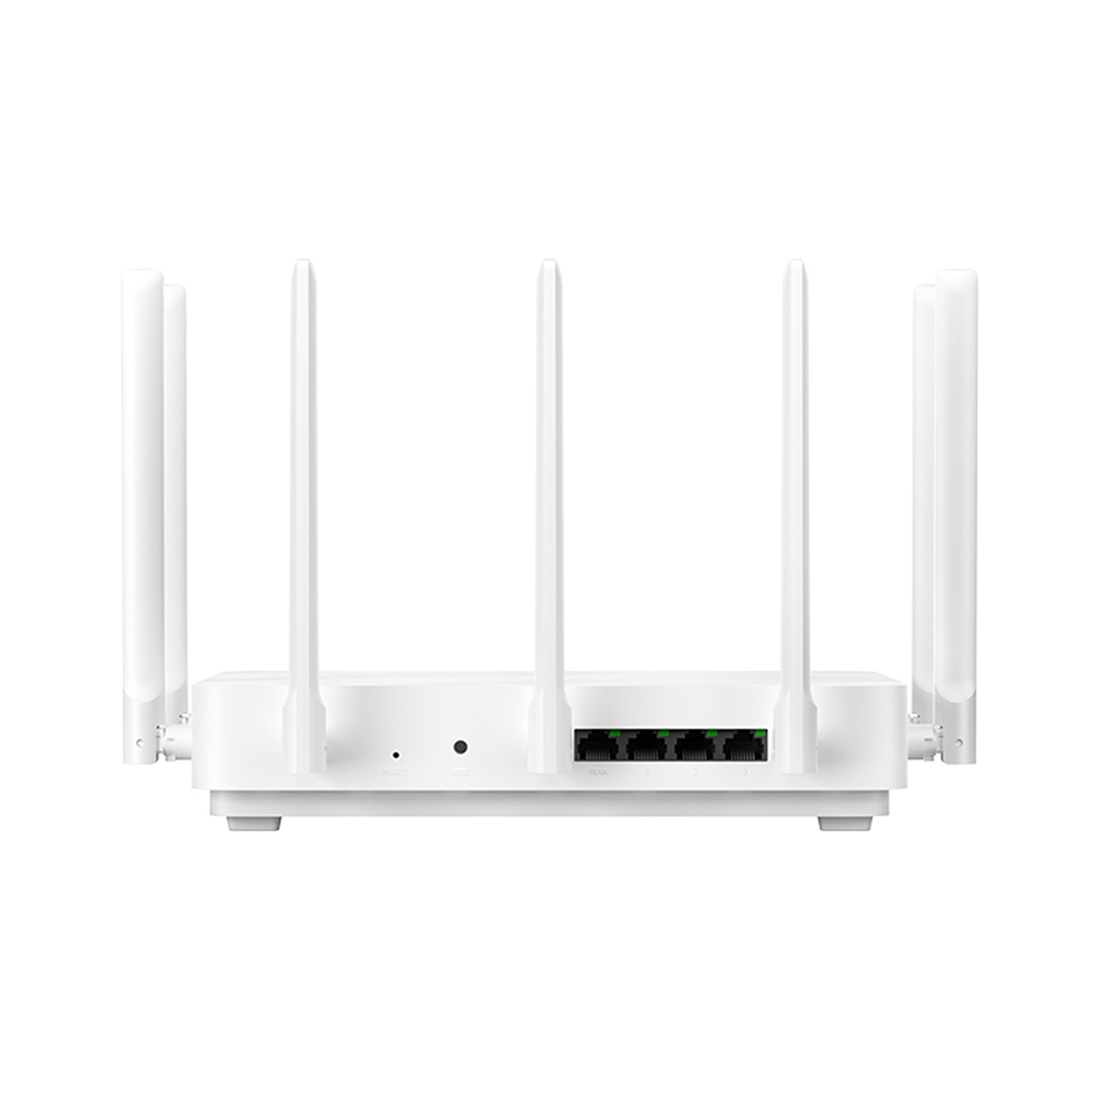 Маршрутизатор Xiaomi Mi AIOT Router AC2350